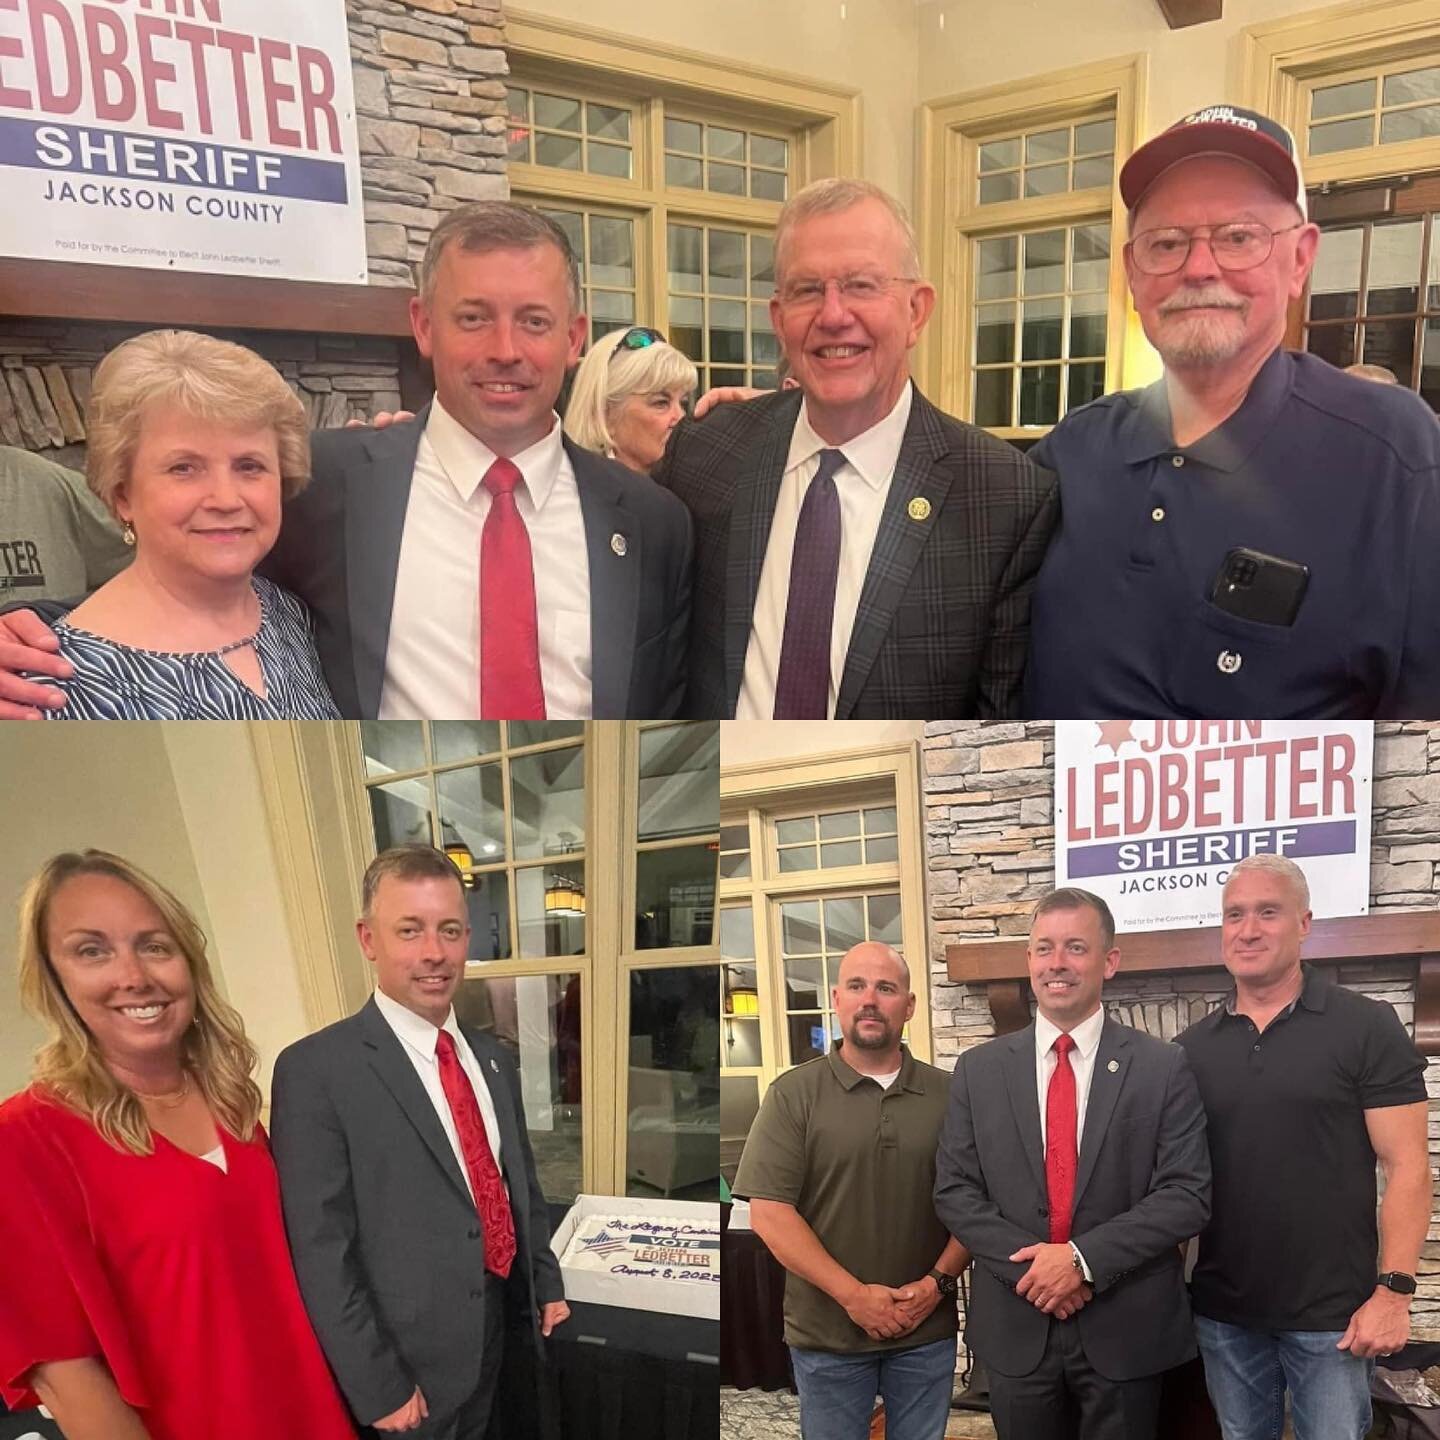 Thank you, Jackson County. I&rsquo;m honored to serve as your sheriff, and I&rsquo;m humbled by your outpouring of support. I look forward to continuing to work hard for all communities throughout the county. - Sheriff John Ledbetter